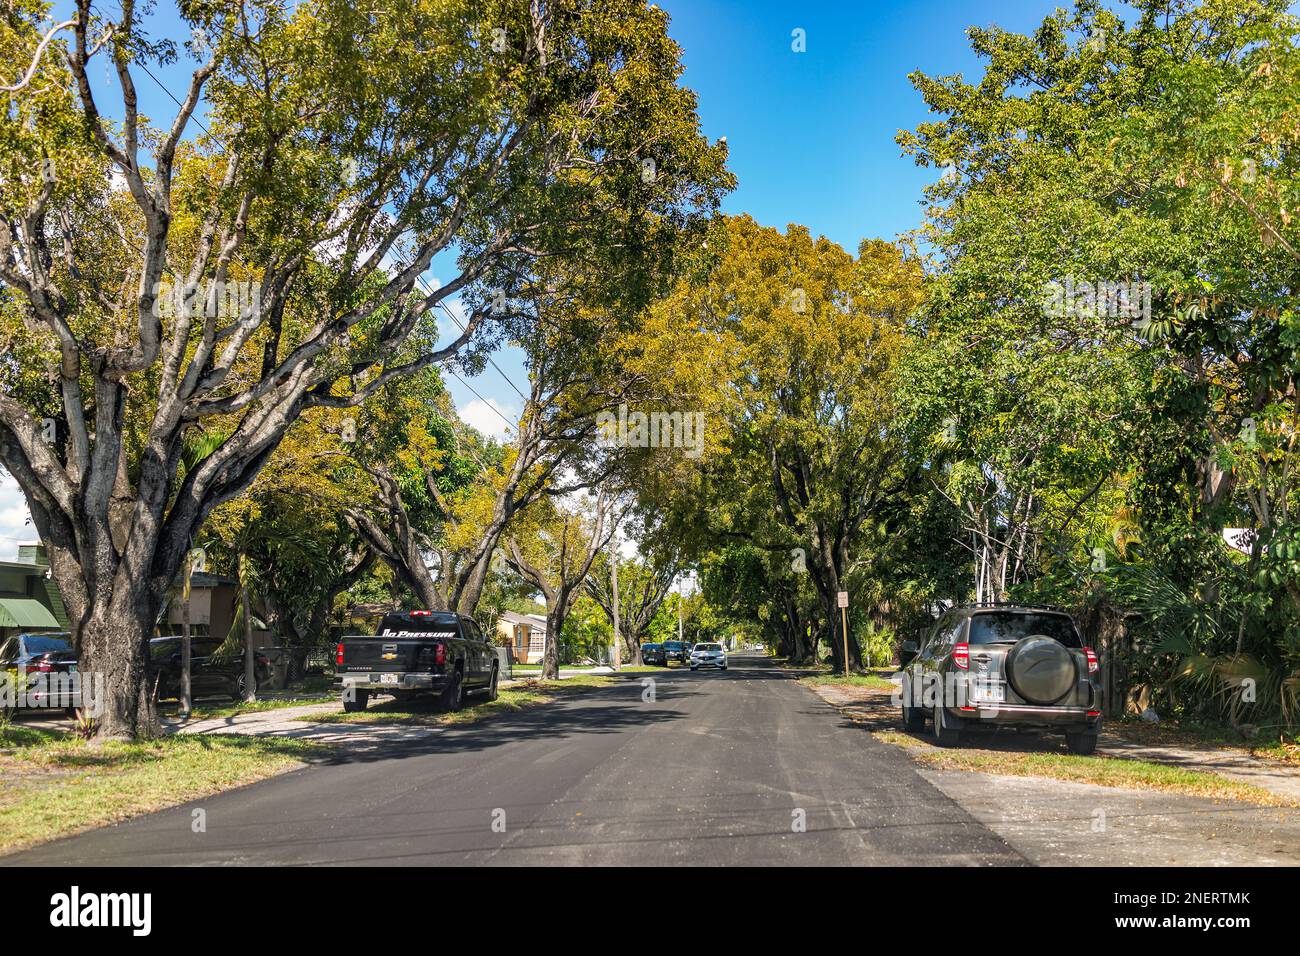 Hollywood, USA - February 12, 2022: Residential narrow street in North Miami, Florida neighborhood community with single family houses homes, cars par Stock Photo